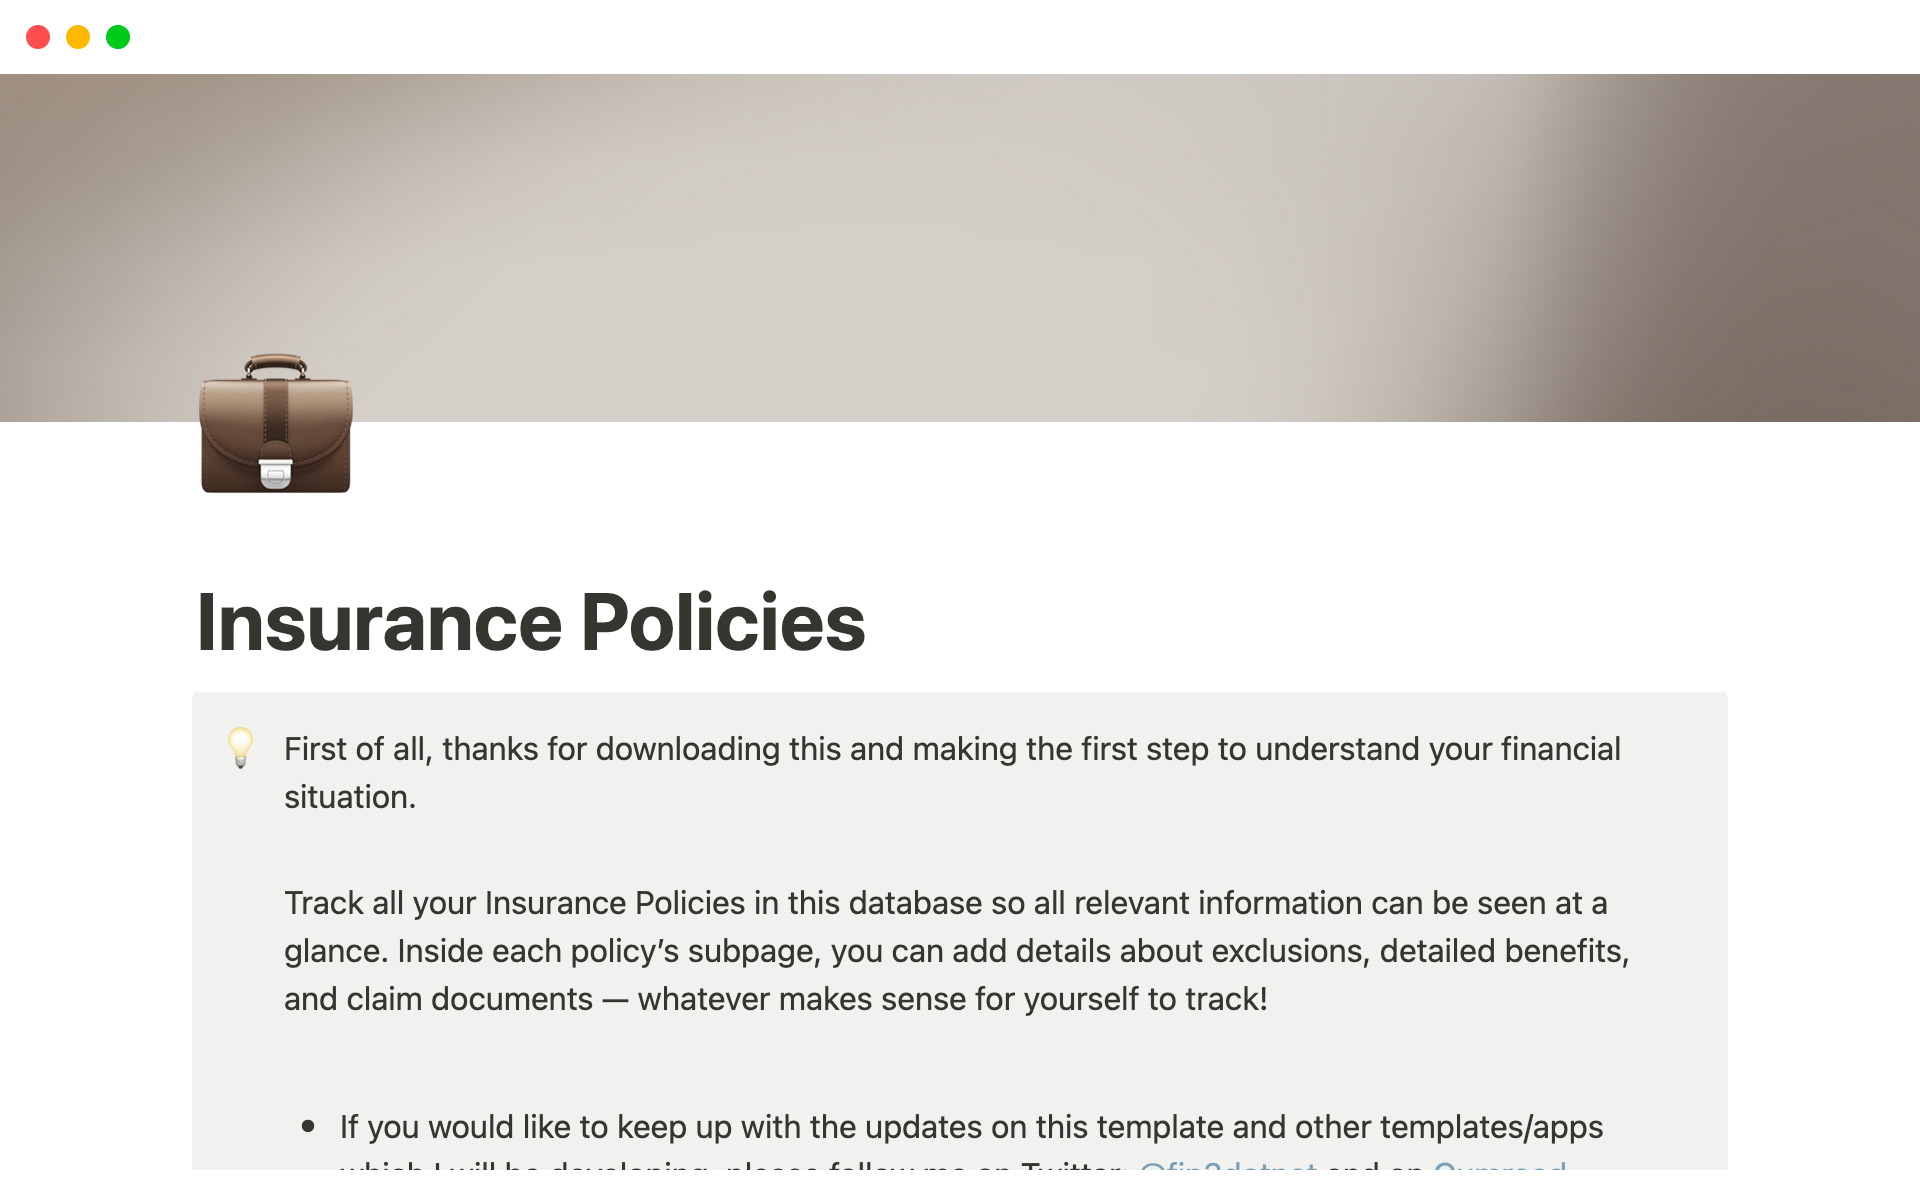 Track all your Insurance Policies so all relevant information can be seen at a glance.